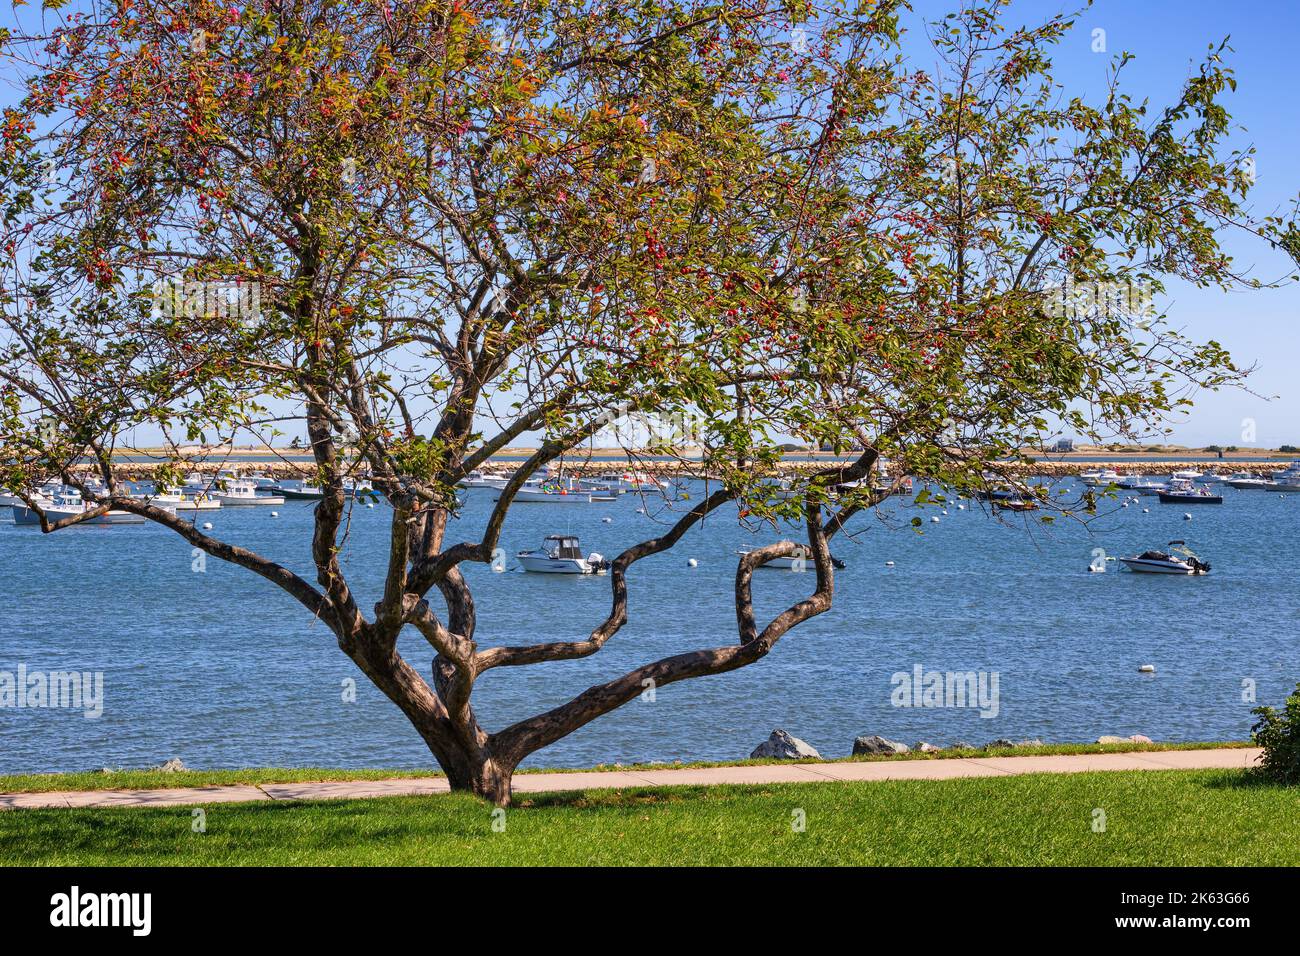 A Hawthorn tree full of tiny red berries infront of a view of the Plymouth Harbor in the background. Stock Photo